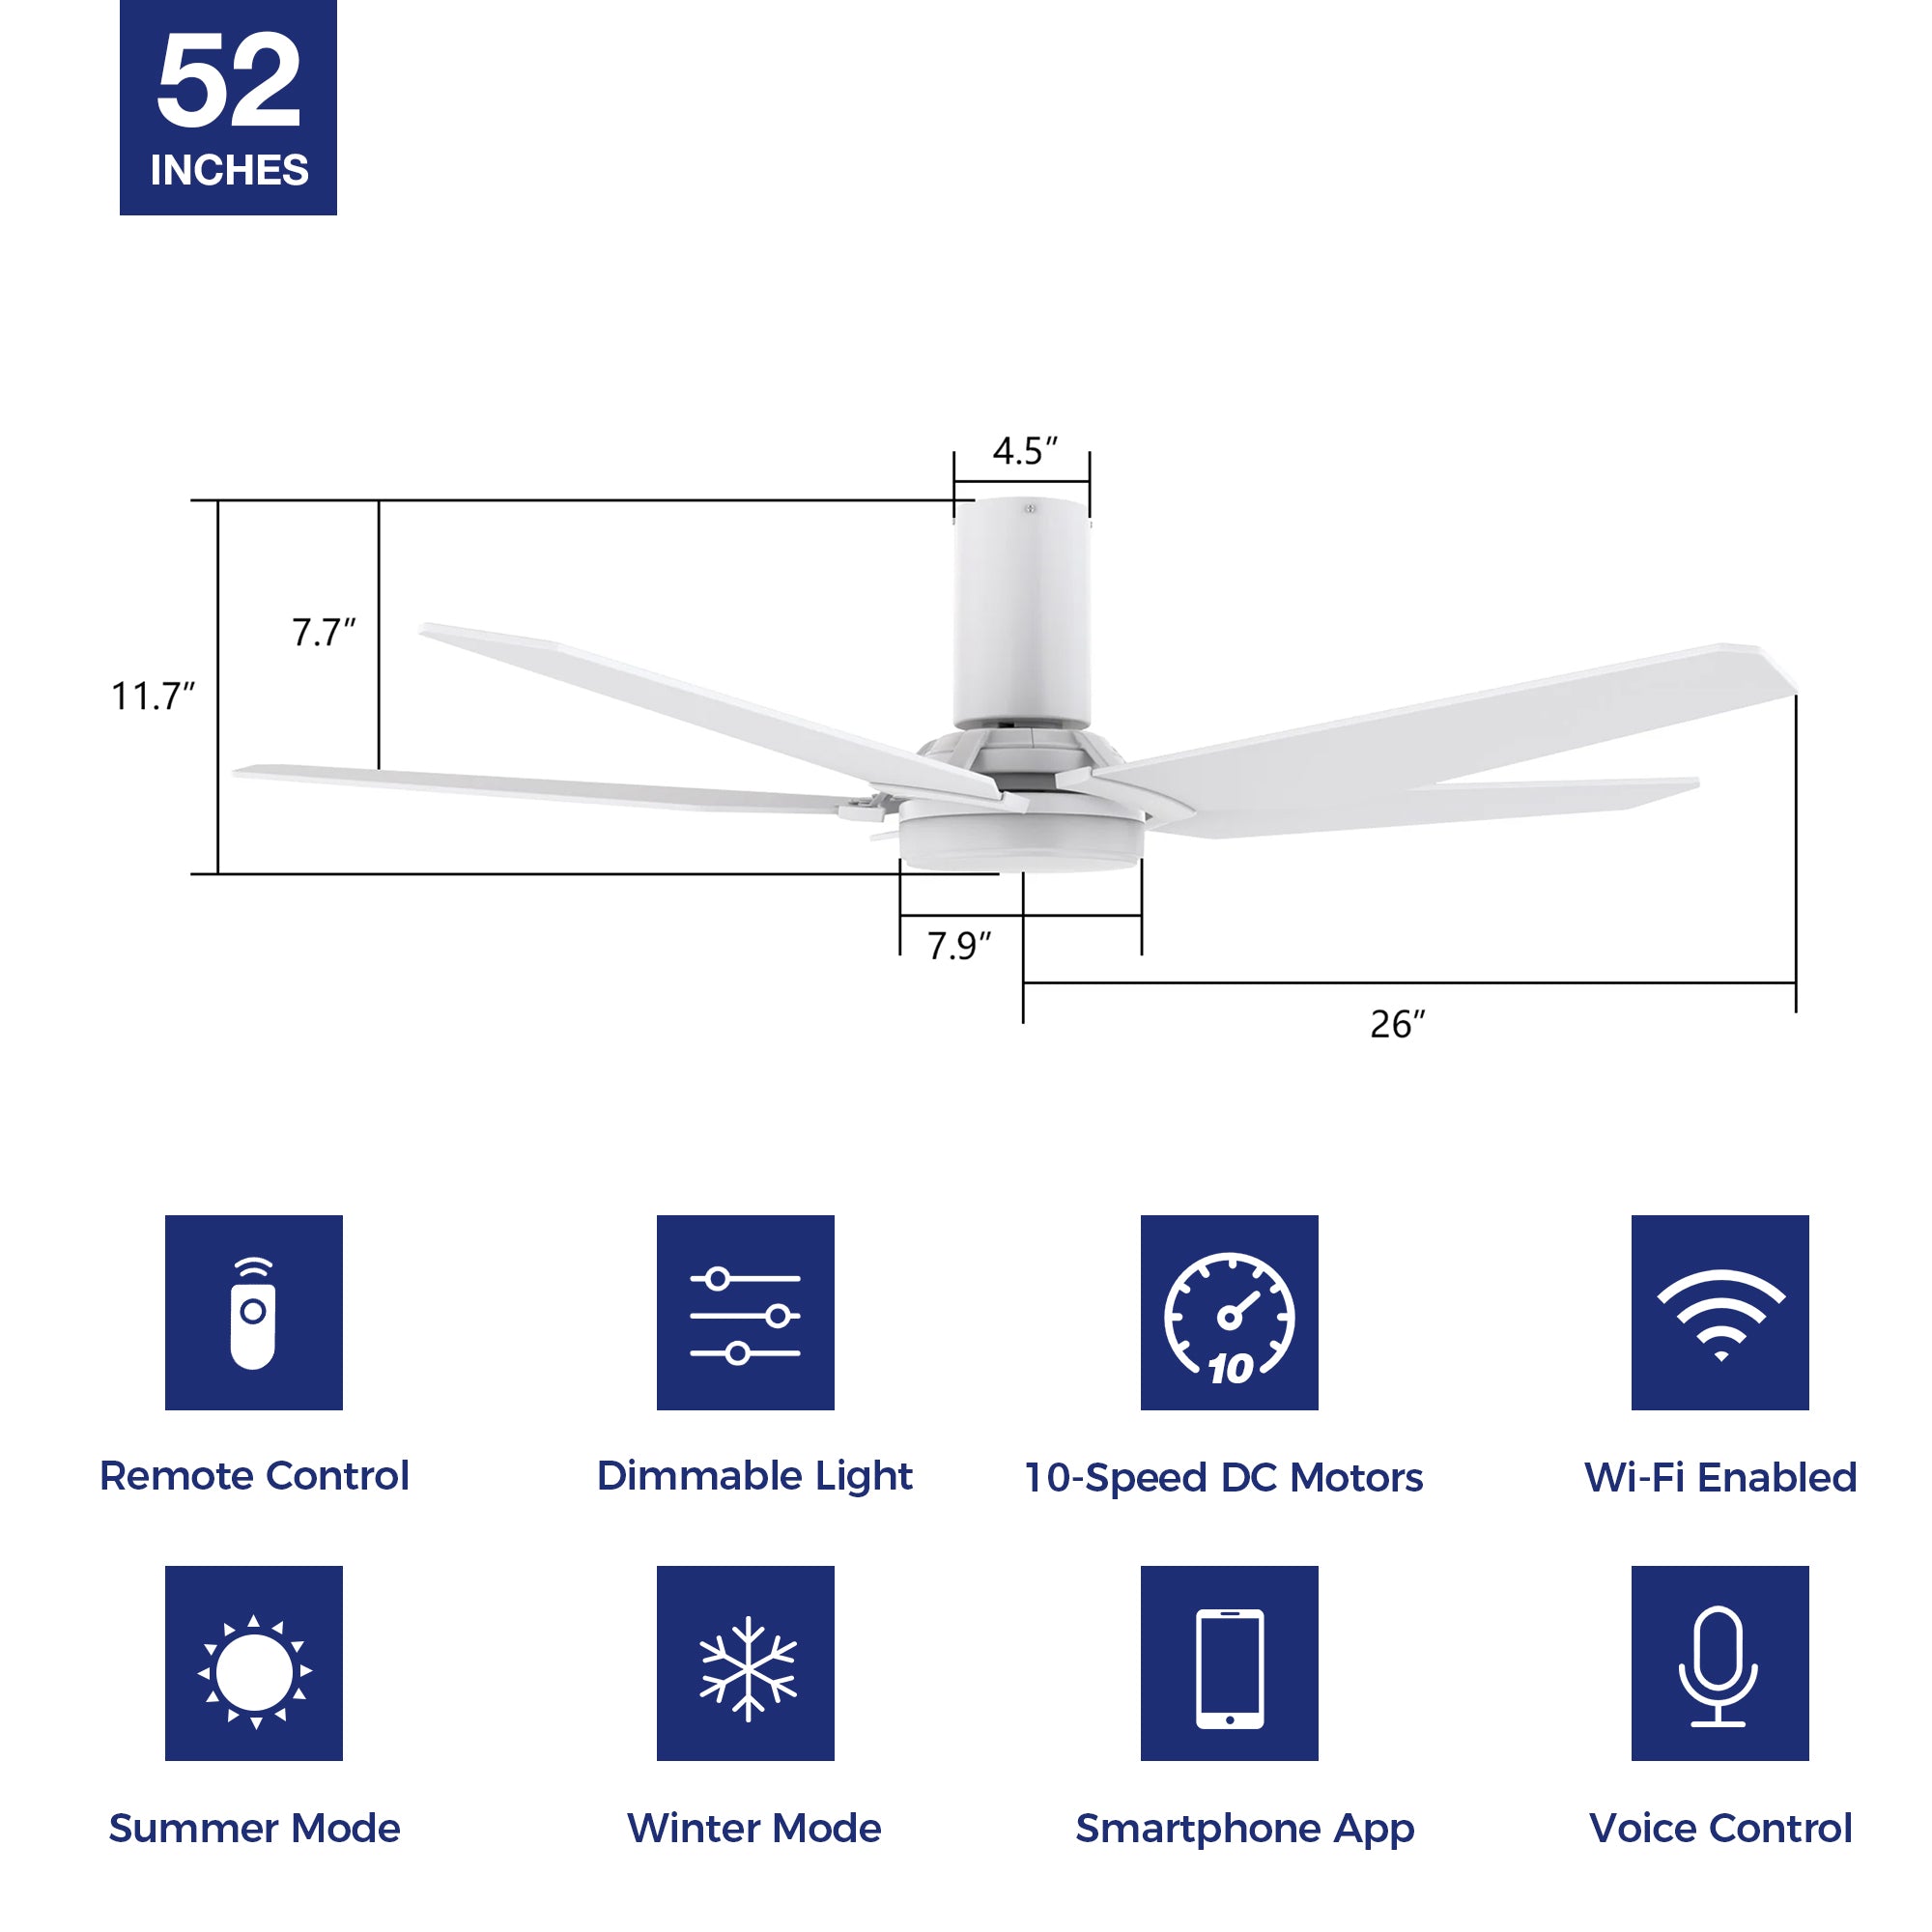 This Voyager 52&#39;&#39; smart ceiling fan keeps your space cool, bright, and stylish. It is a soft modern masterpiece perfect for your large indoor living spaces. This Wifi smart ceiling fan is a simplicity designing with White finish, use elegant Plywood blades, Glass shade and has an integrated 4000K LED cool light. The fan features Remote control, Wi-Fi apps, Siri Shortcut and Voice control technology (compatible with Amazon Alexa and Google Home Assistant ) to set fan preferences.